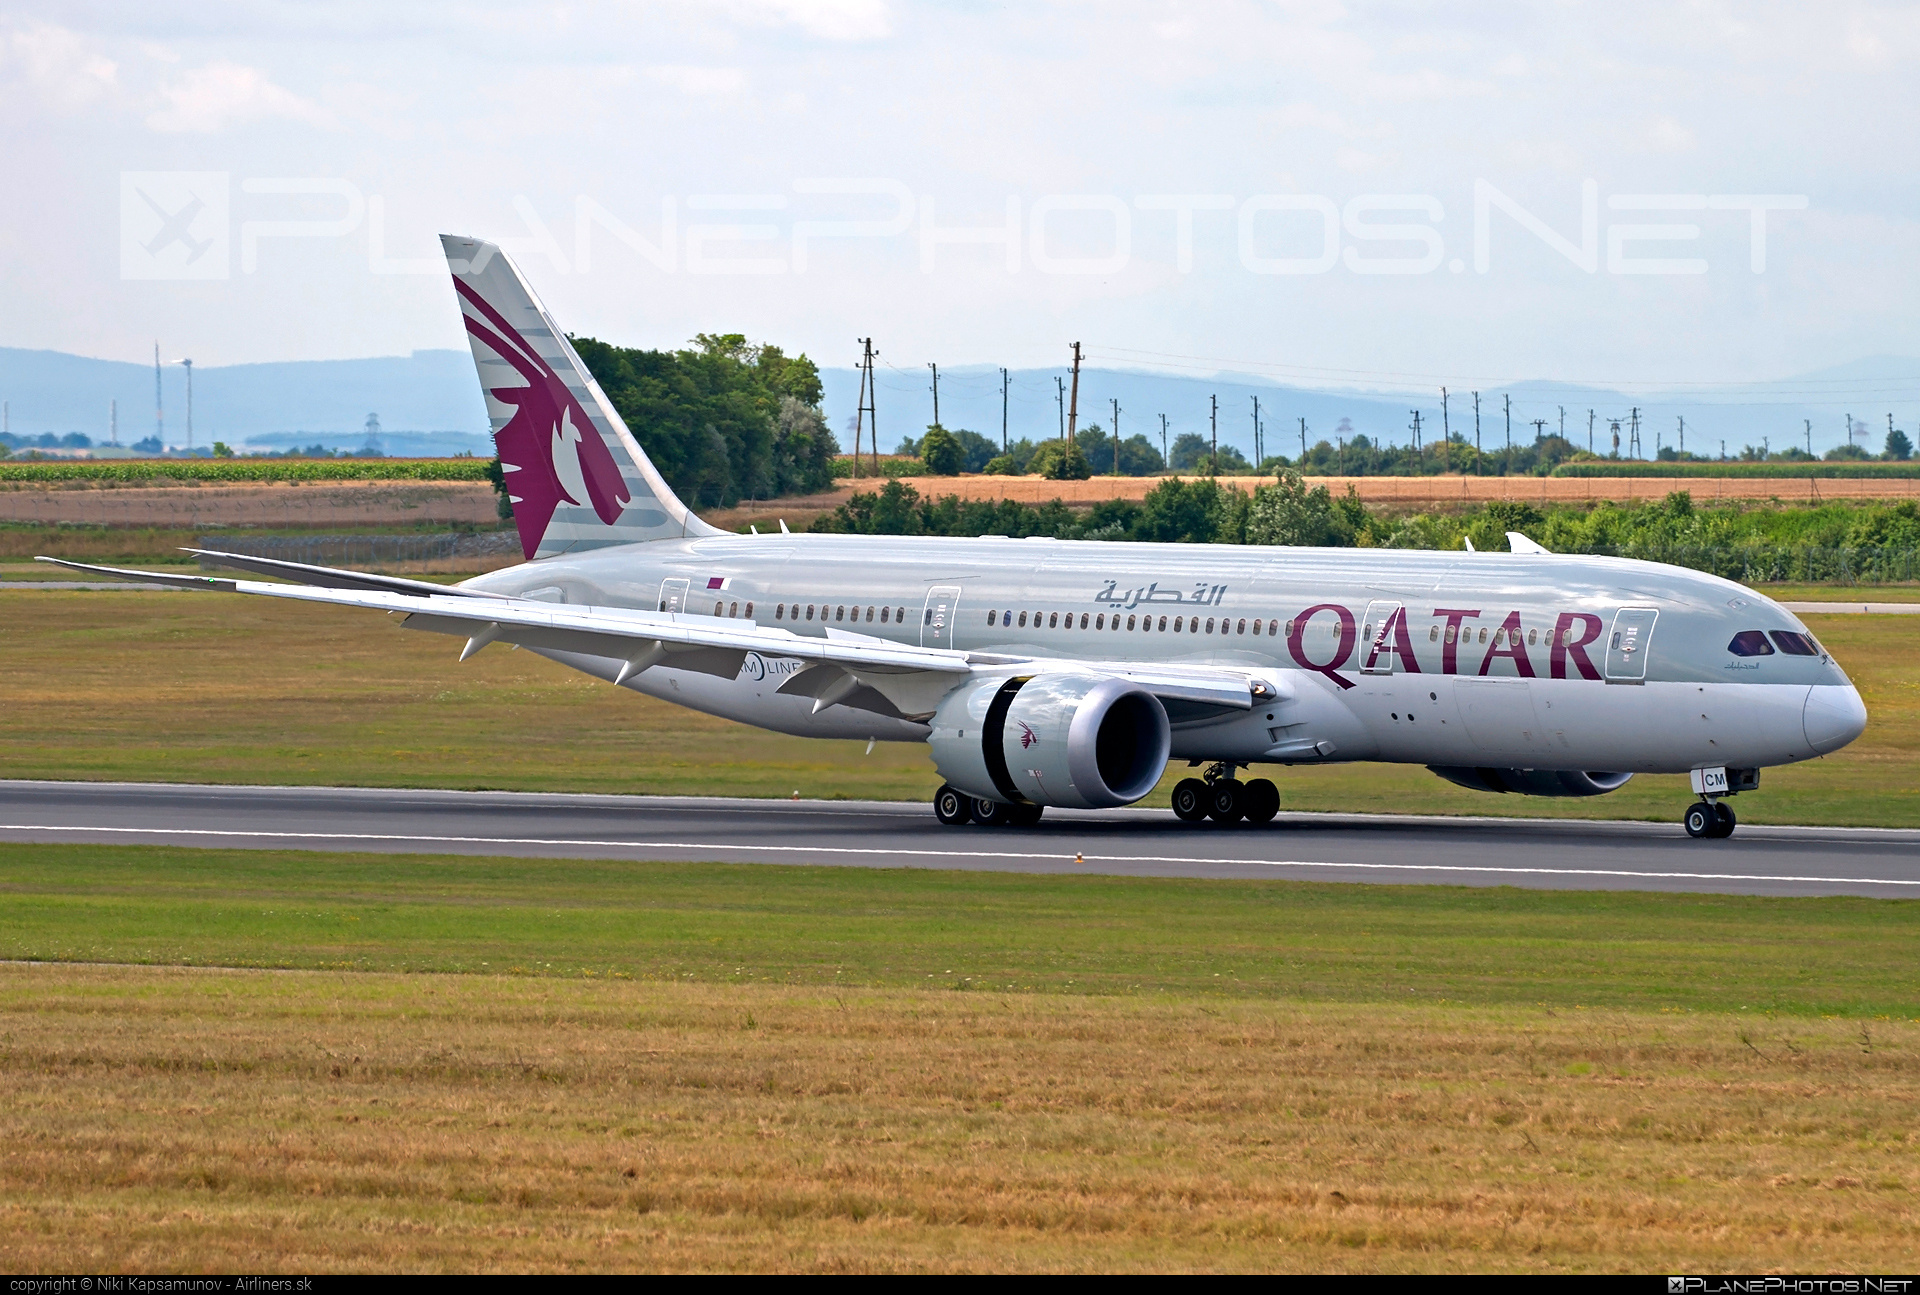 Boeing 787-8 Dreamliner - A7-BCM operated by Qatar Airways #b787 #boeing #boeing787 #dreamliner #qatarairways